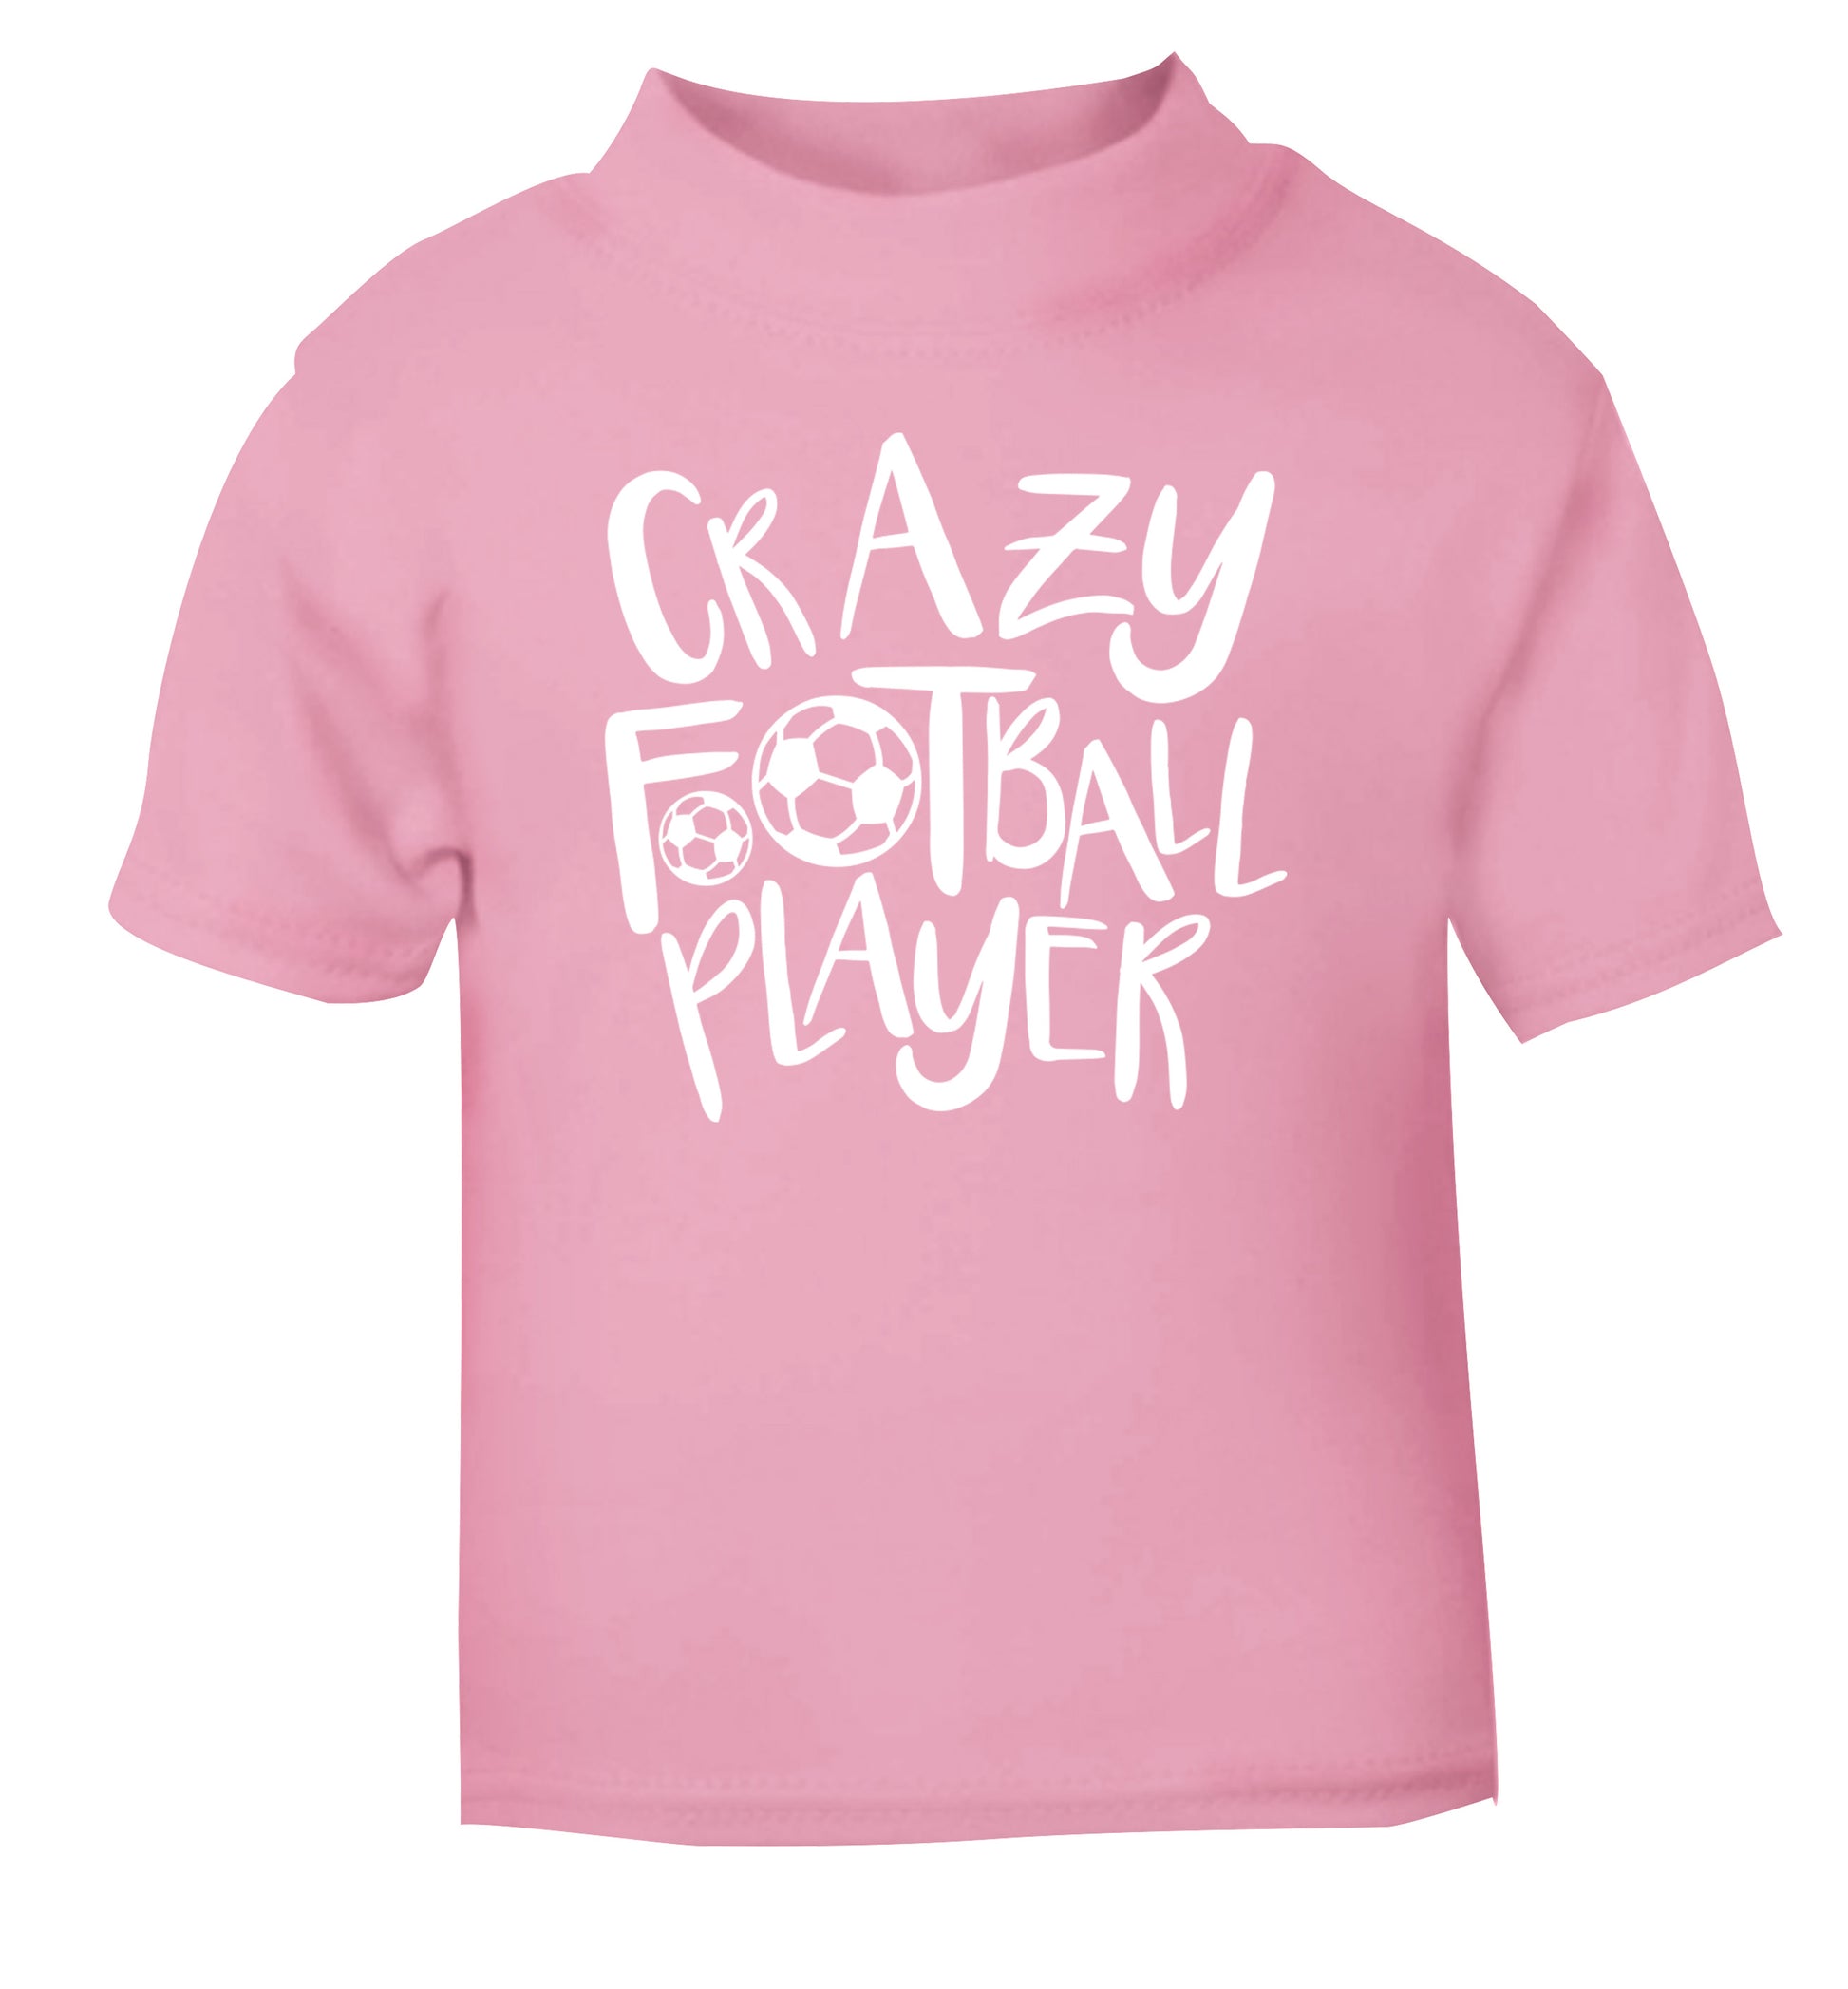 Crazy football player light pink Baby Toddler Tshirt 2 Years